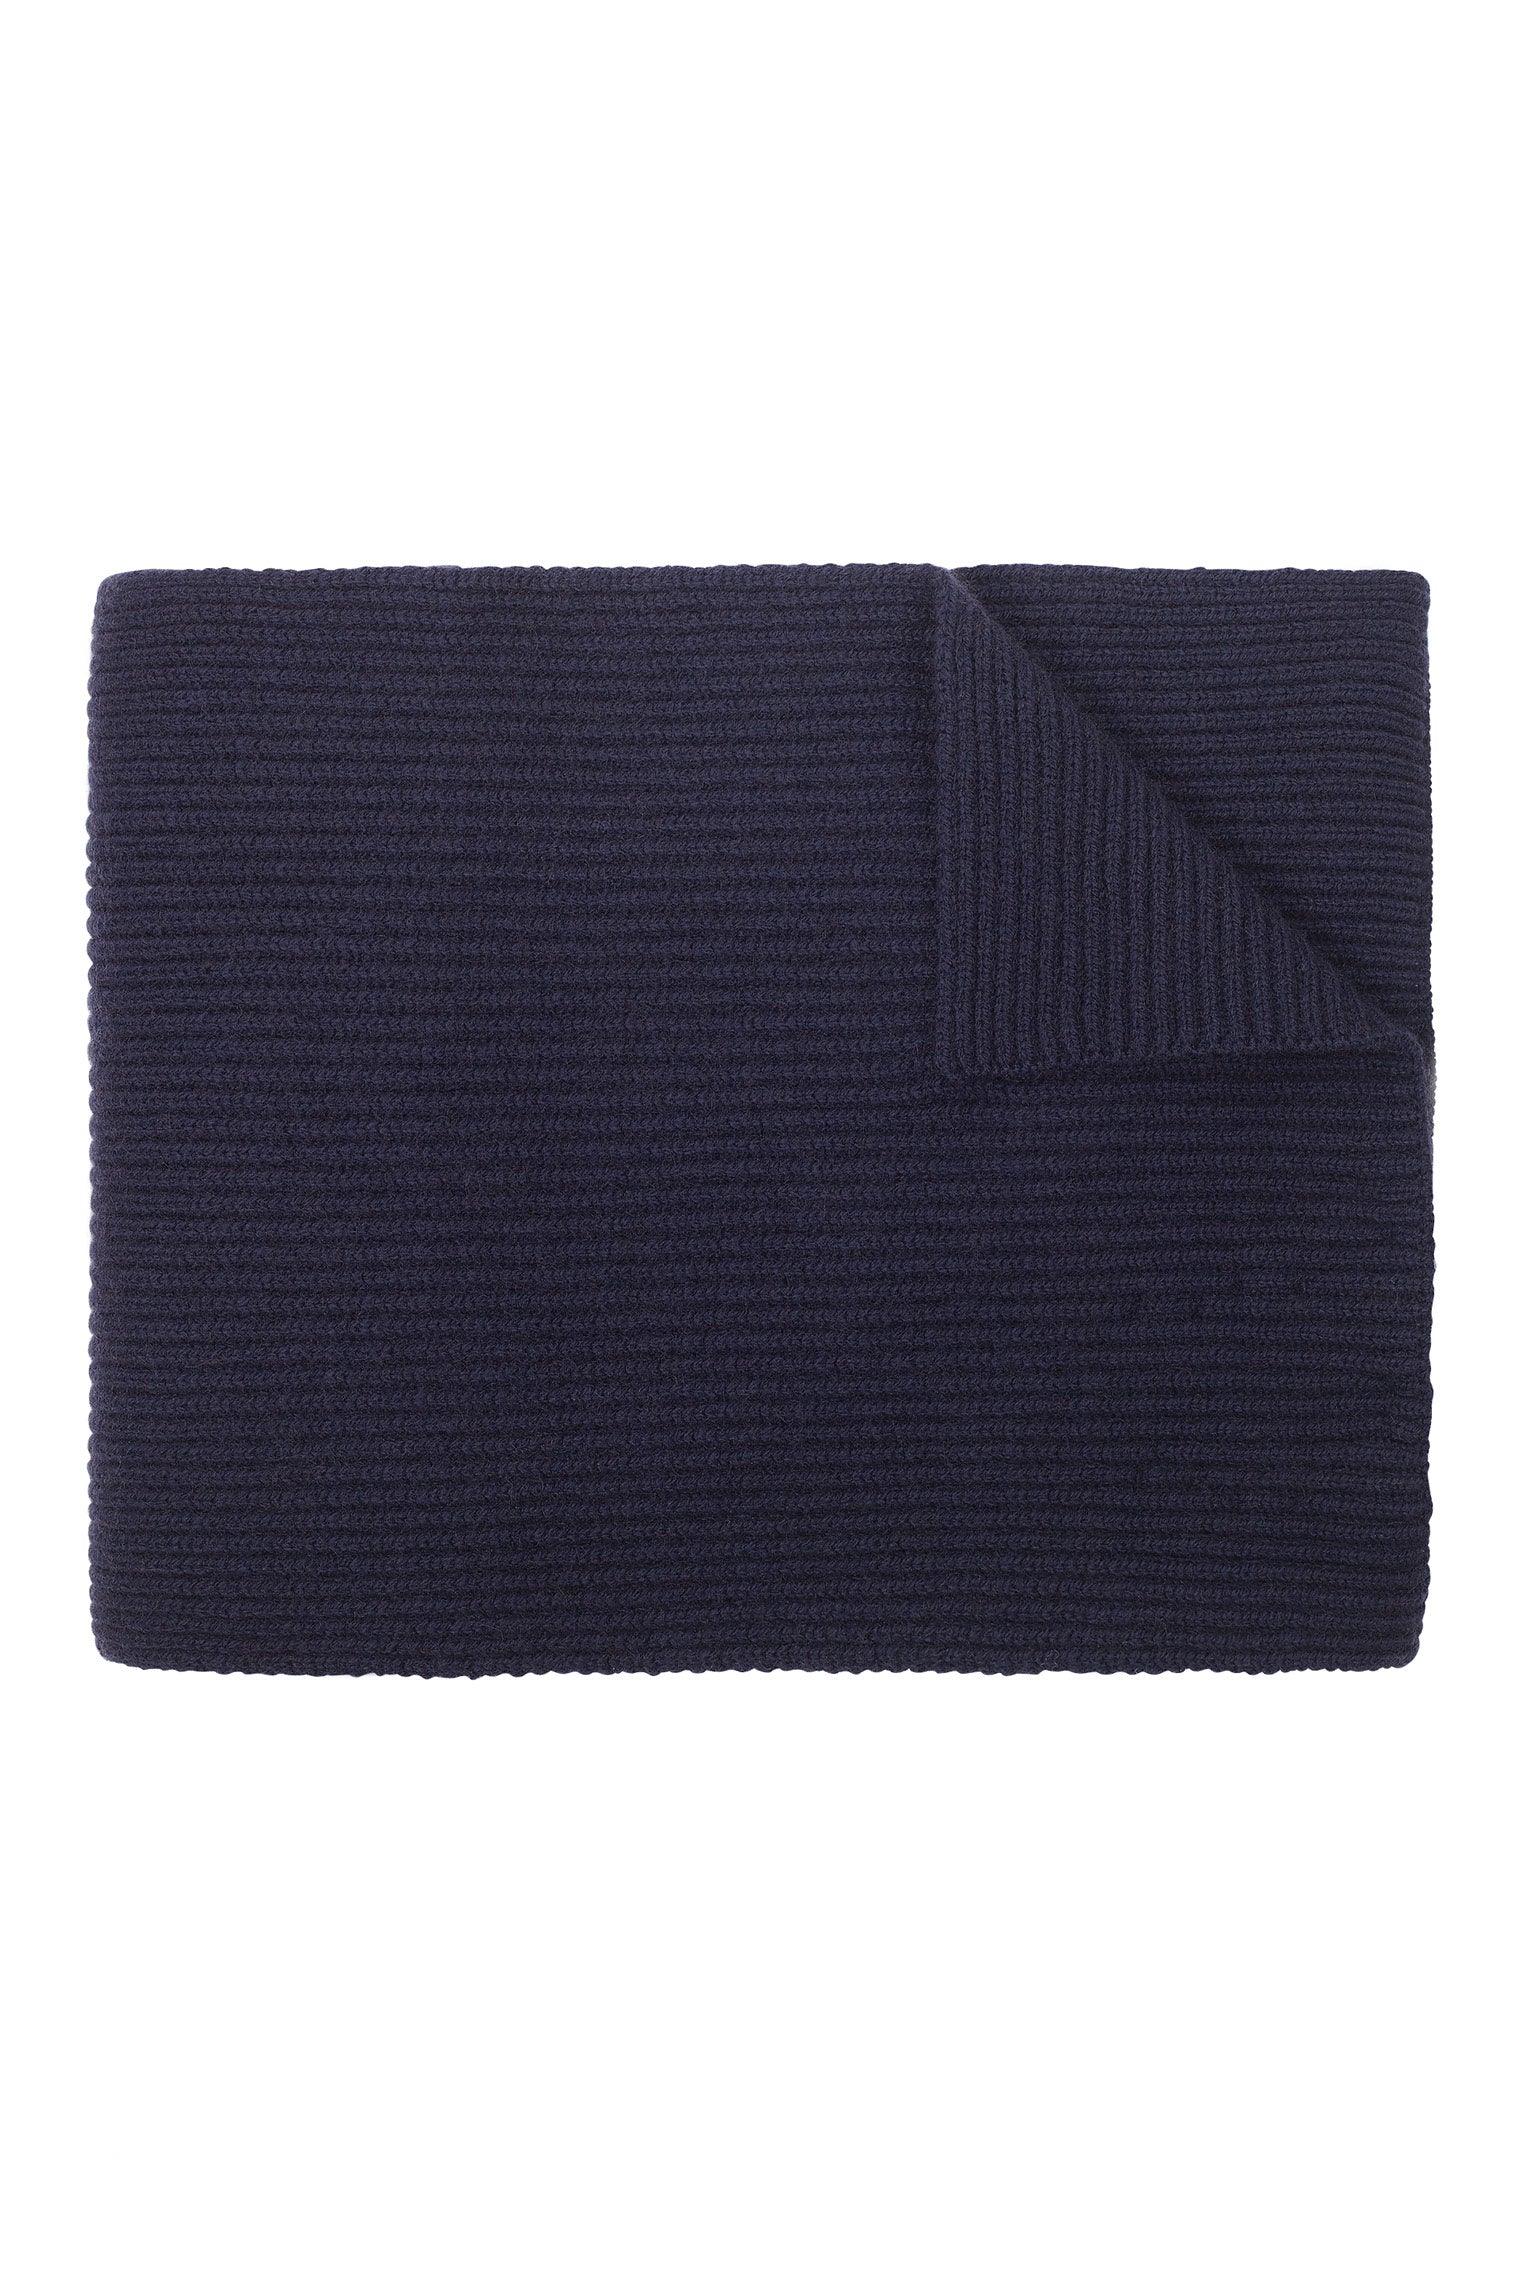 Cashmere Knitted Scarf - Accessories - Lock & Co. Hatters London UK